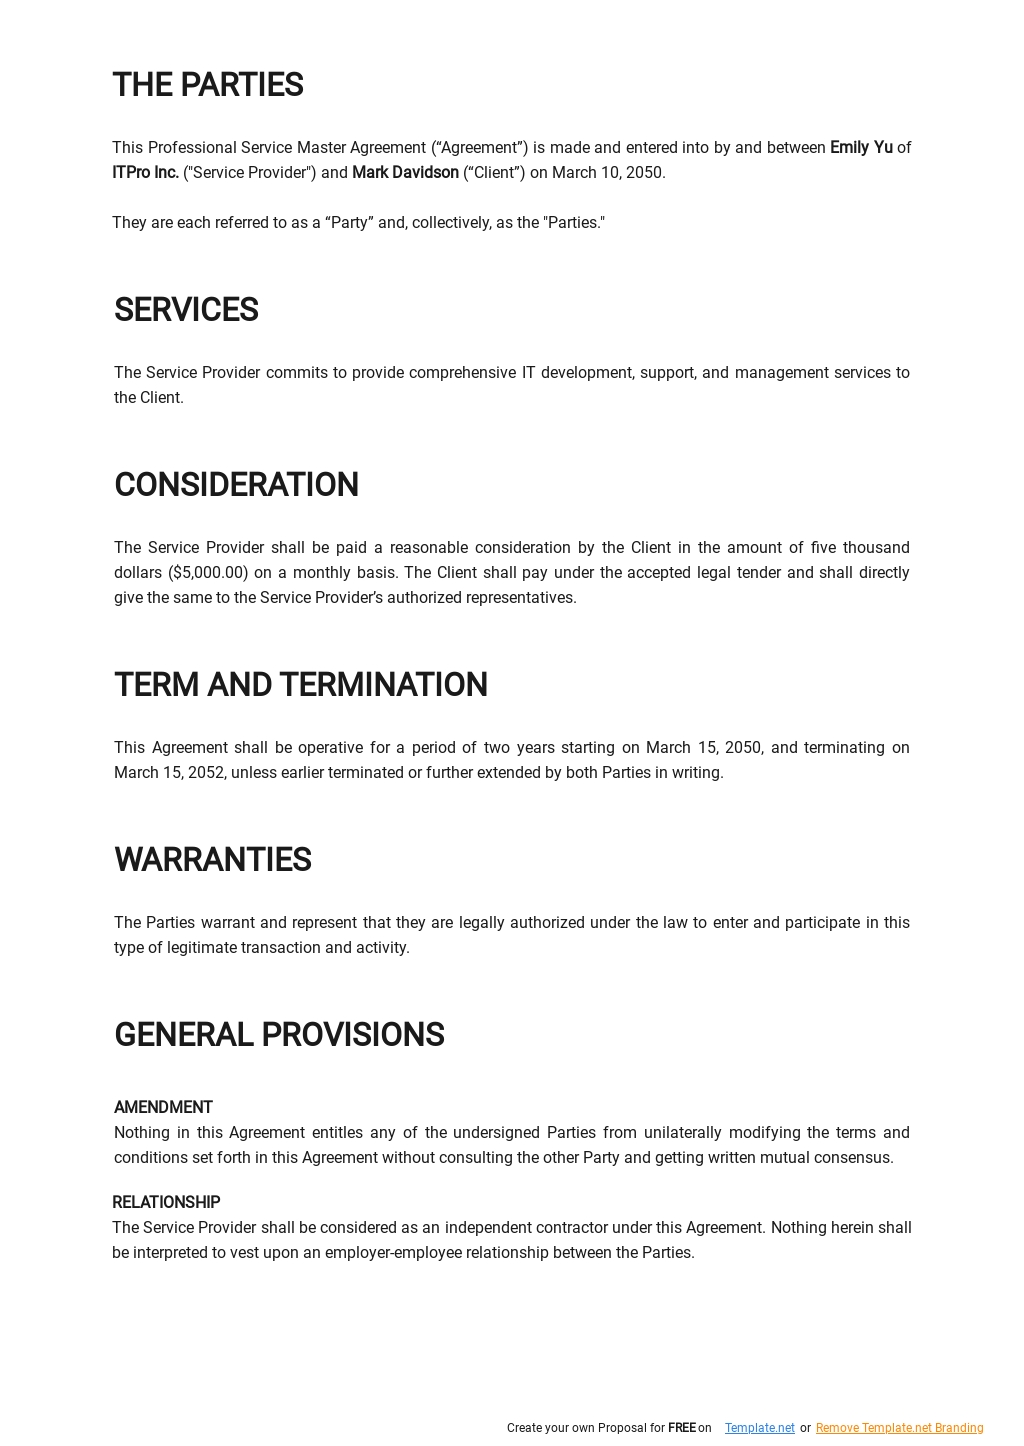 Professional Services Master Agreement Template 1.jpe